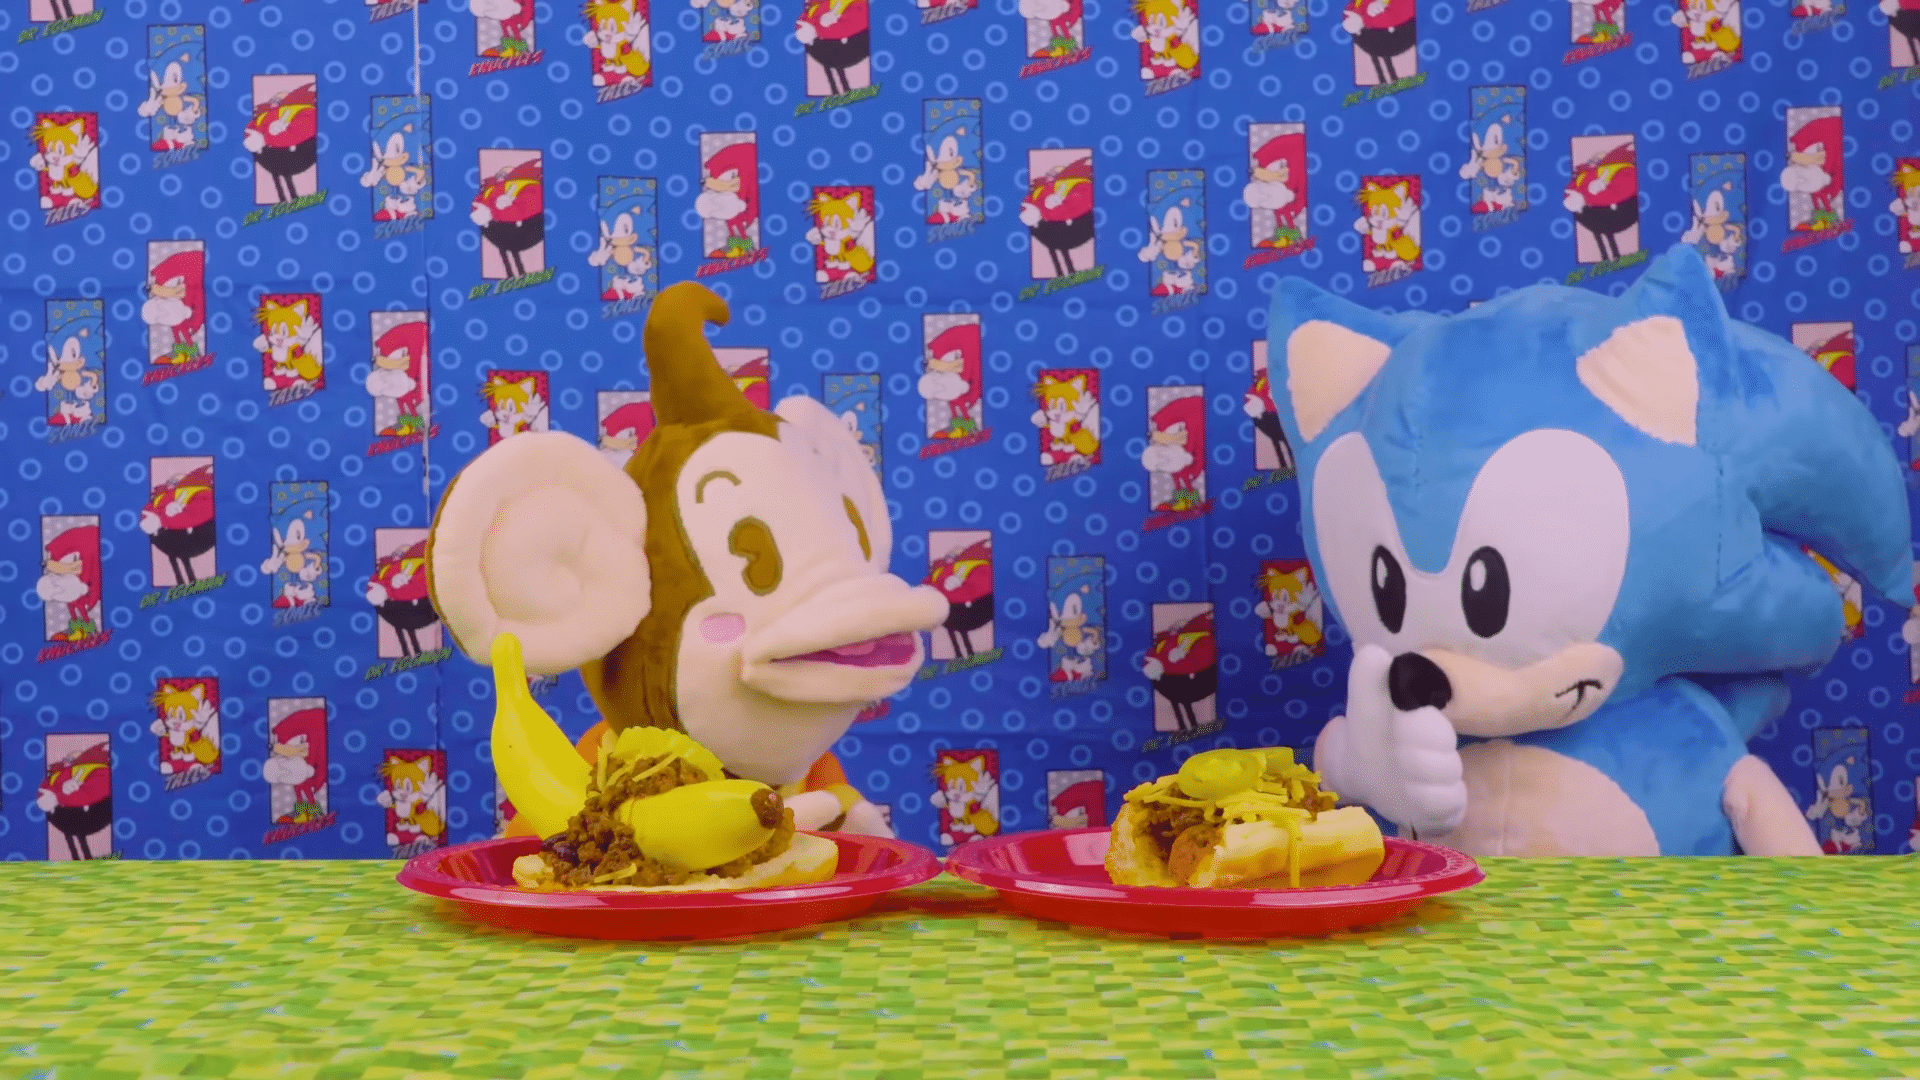 Sonic and AiAi Cook Banana Chili Cheese Dogs in Official Video (Yes, You Read That Correctly)